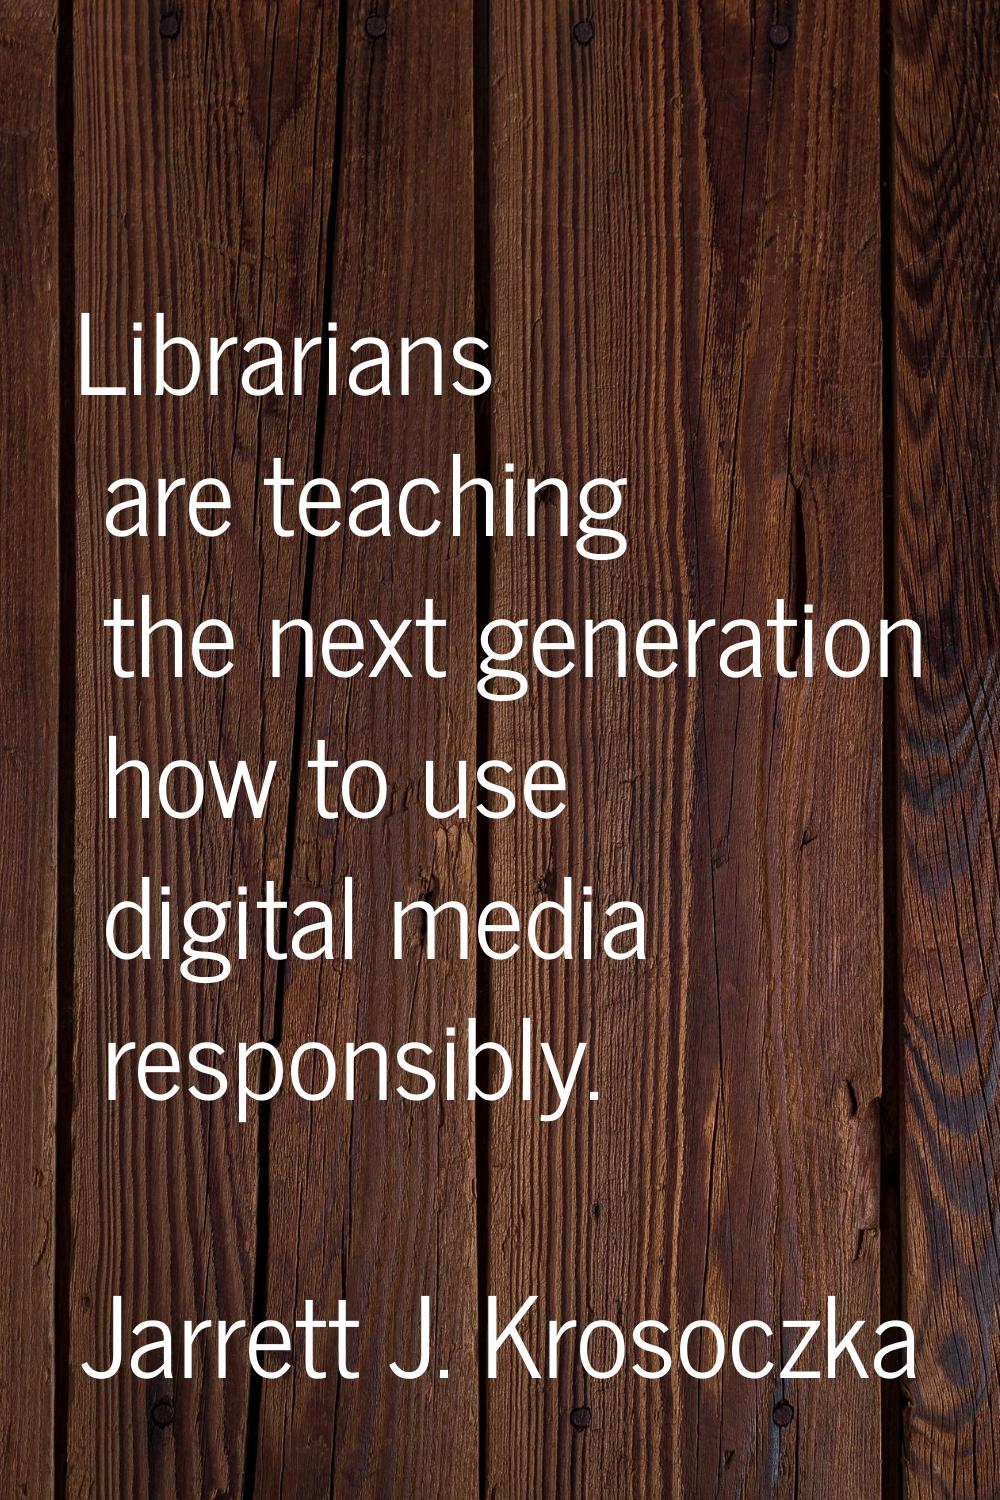 Librarians are teaching the next generation how to use digital media responsibly.